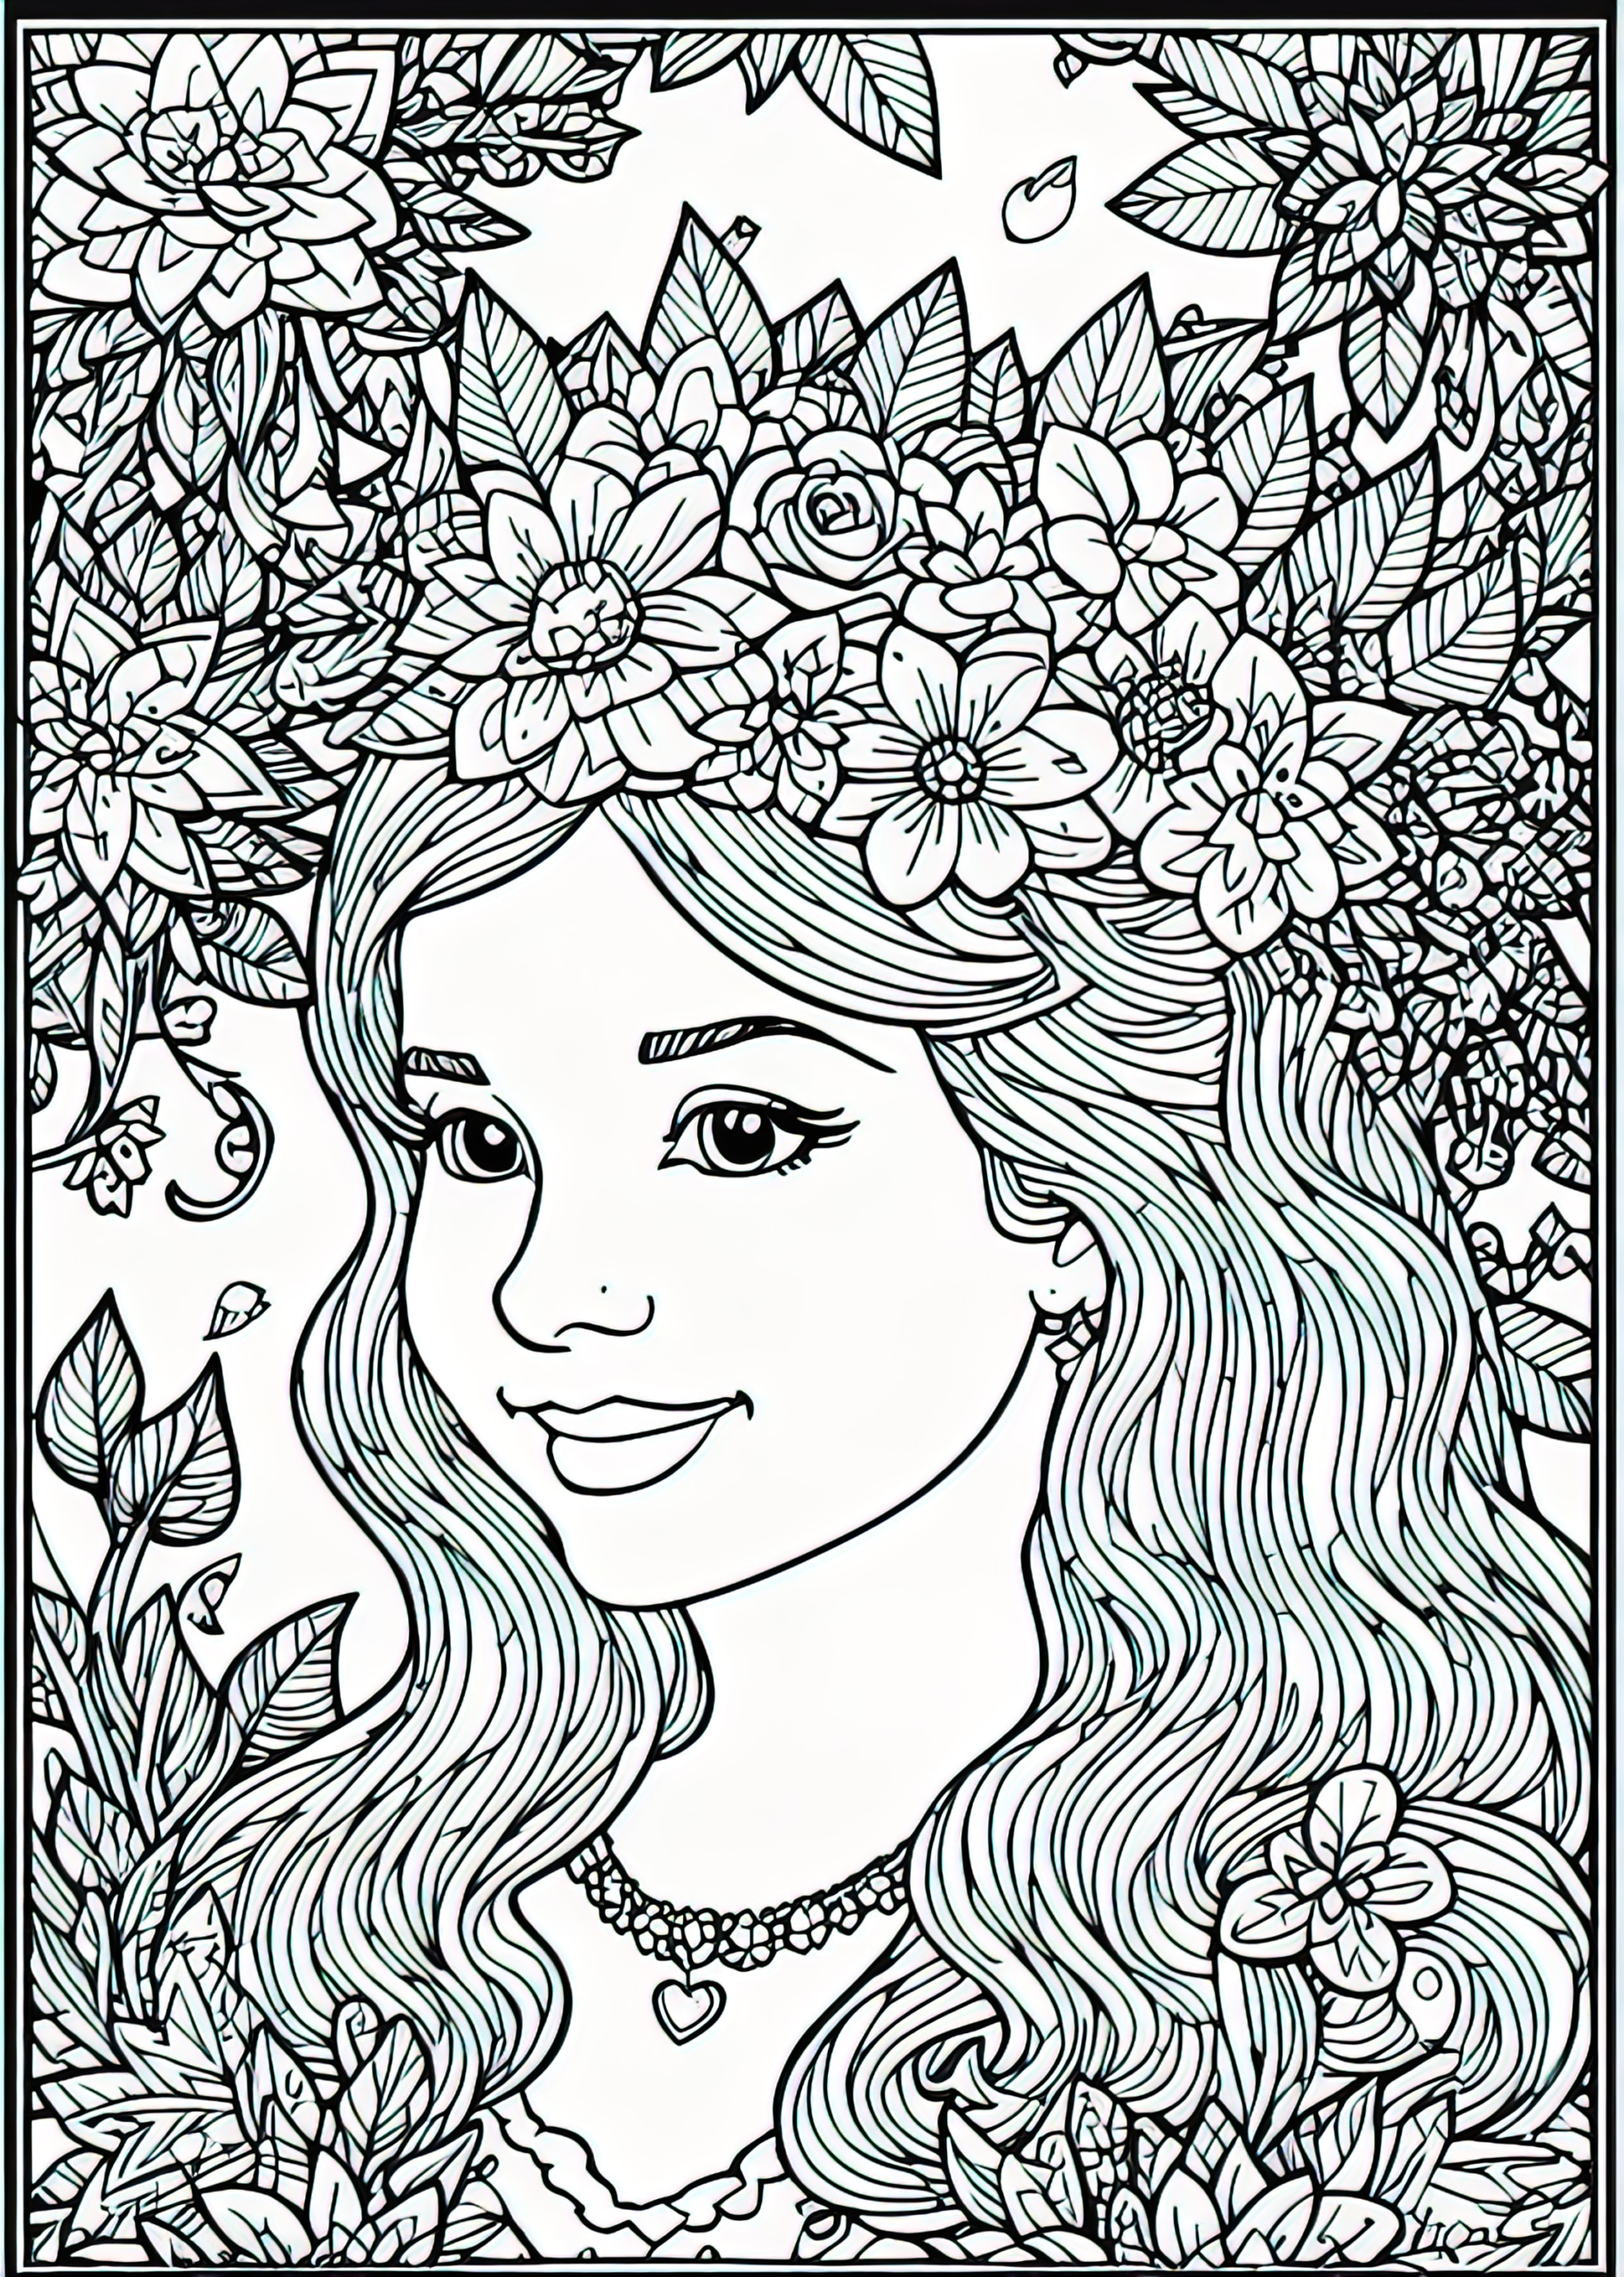 Wedding colouring page of bride and groom on tandem.